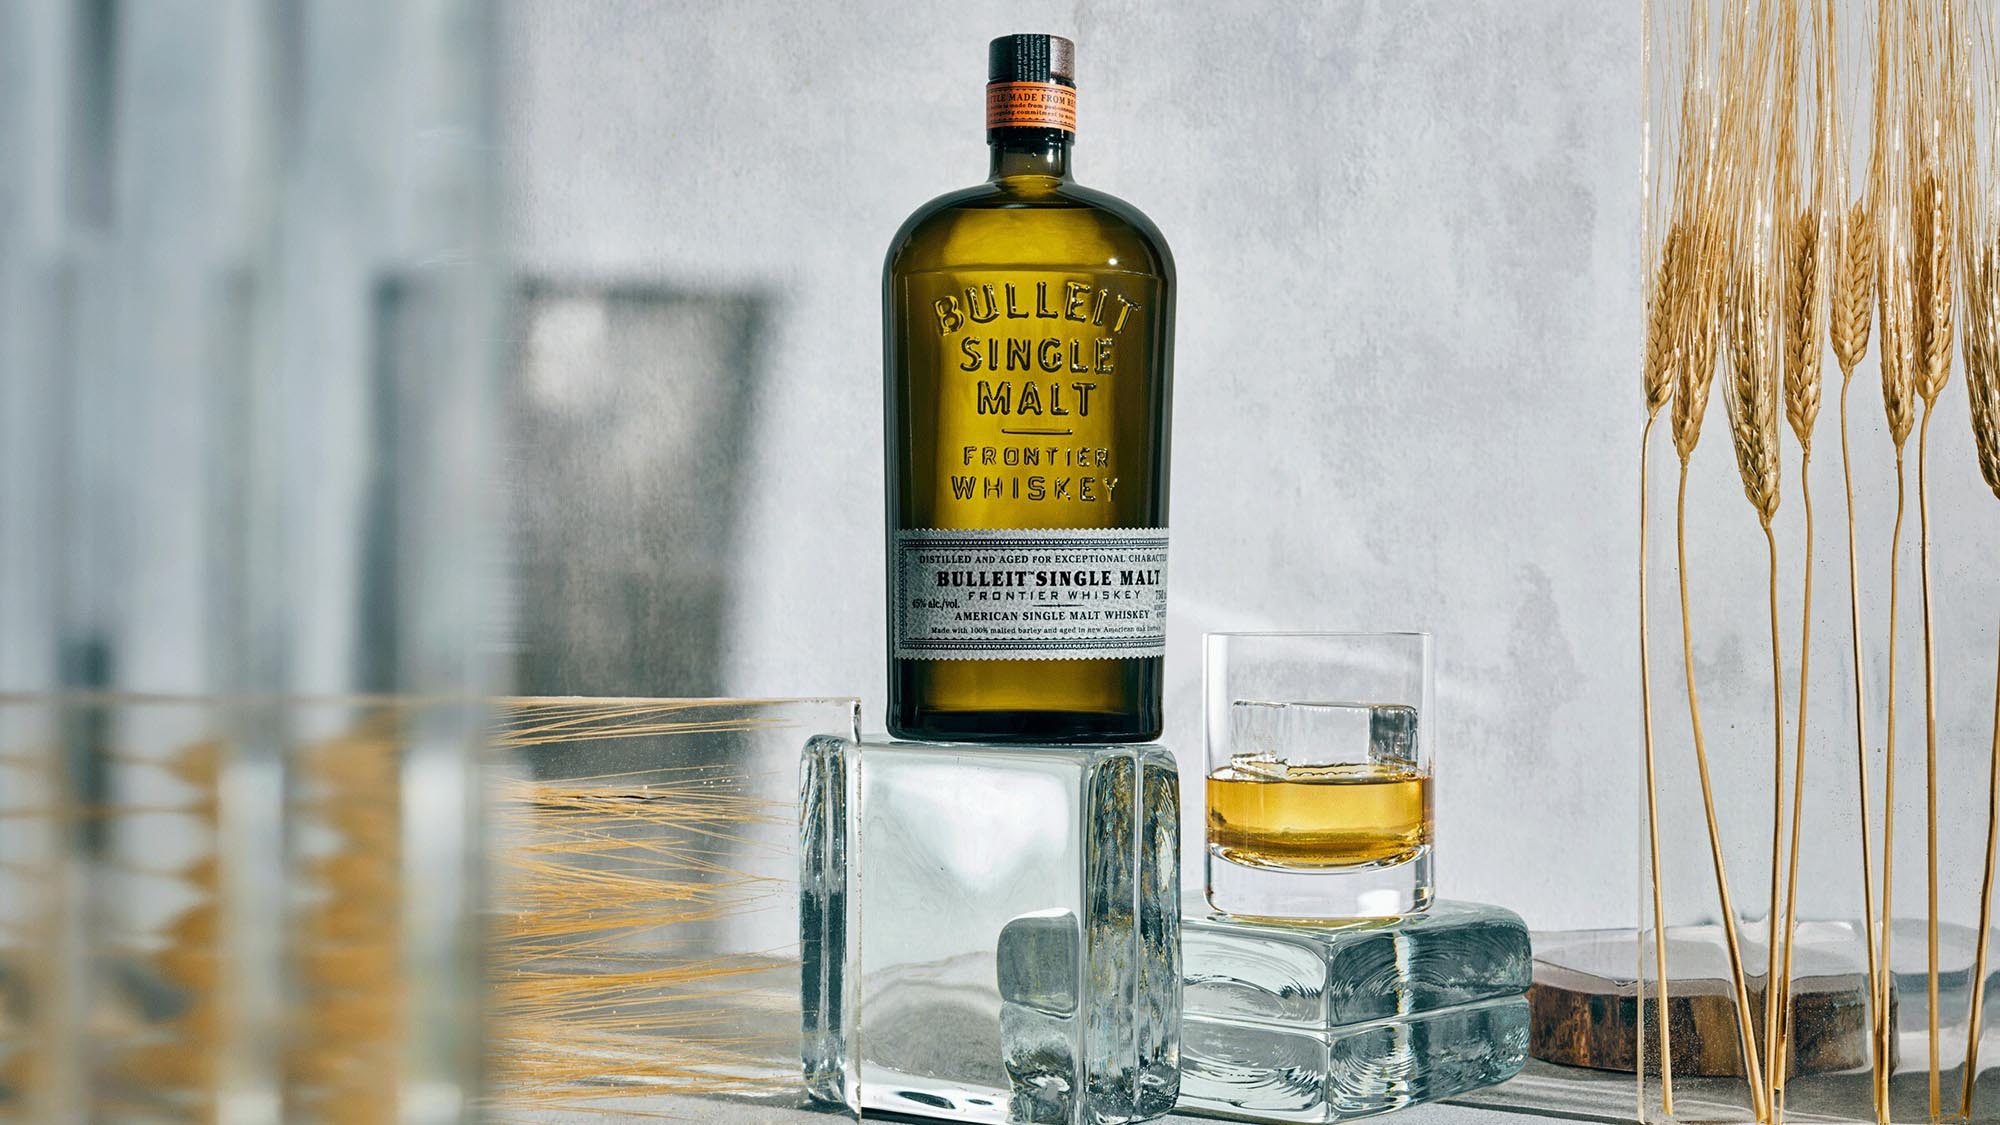 Bulleit American Single Malt Brings Together The Best Of Scottish And American Whiskeys